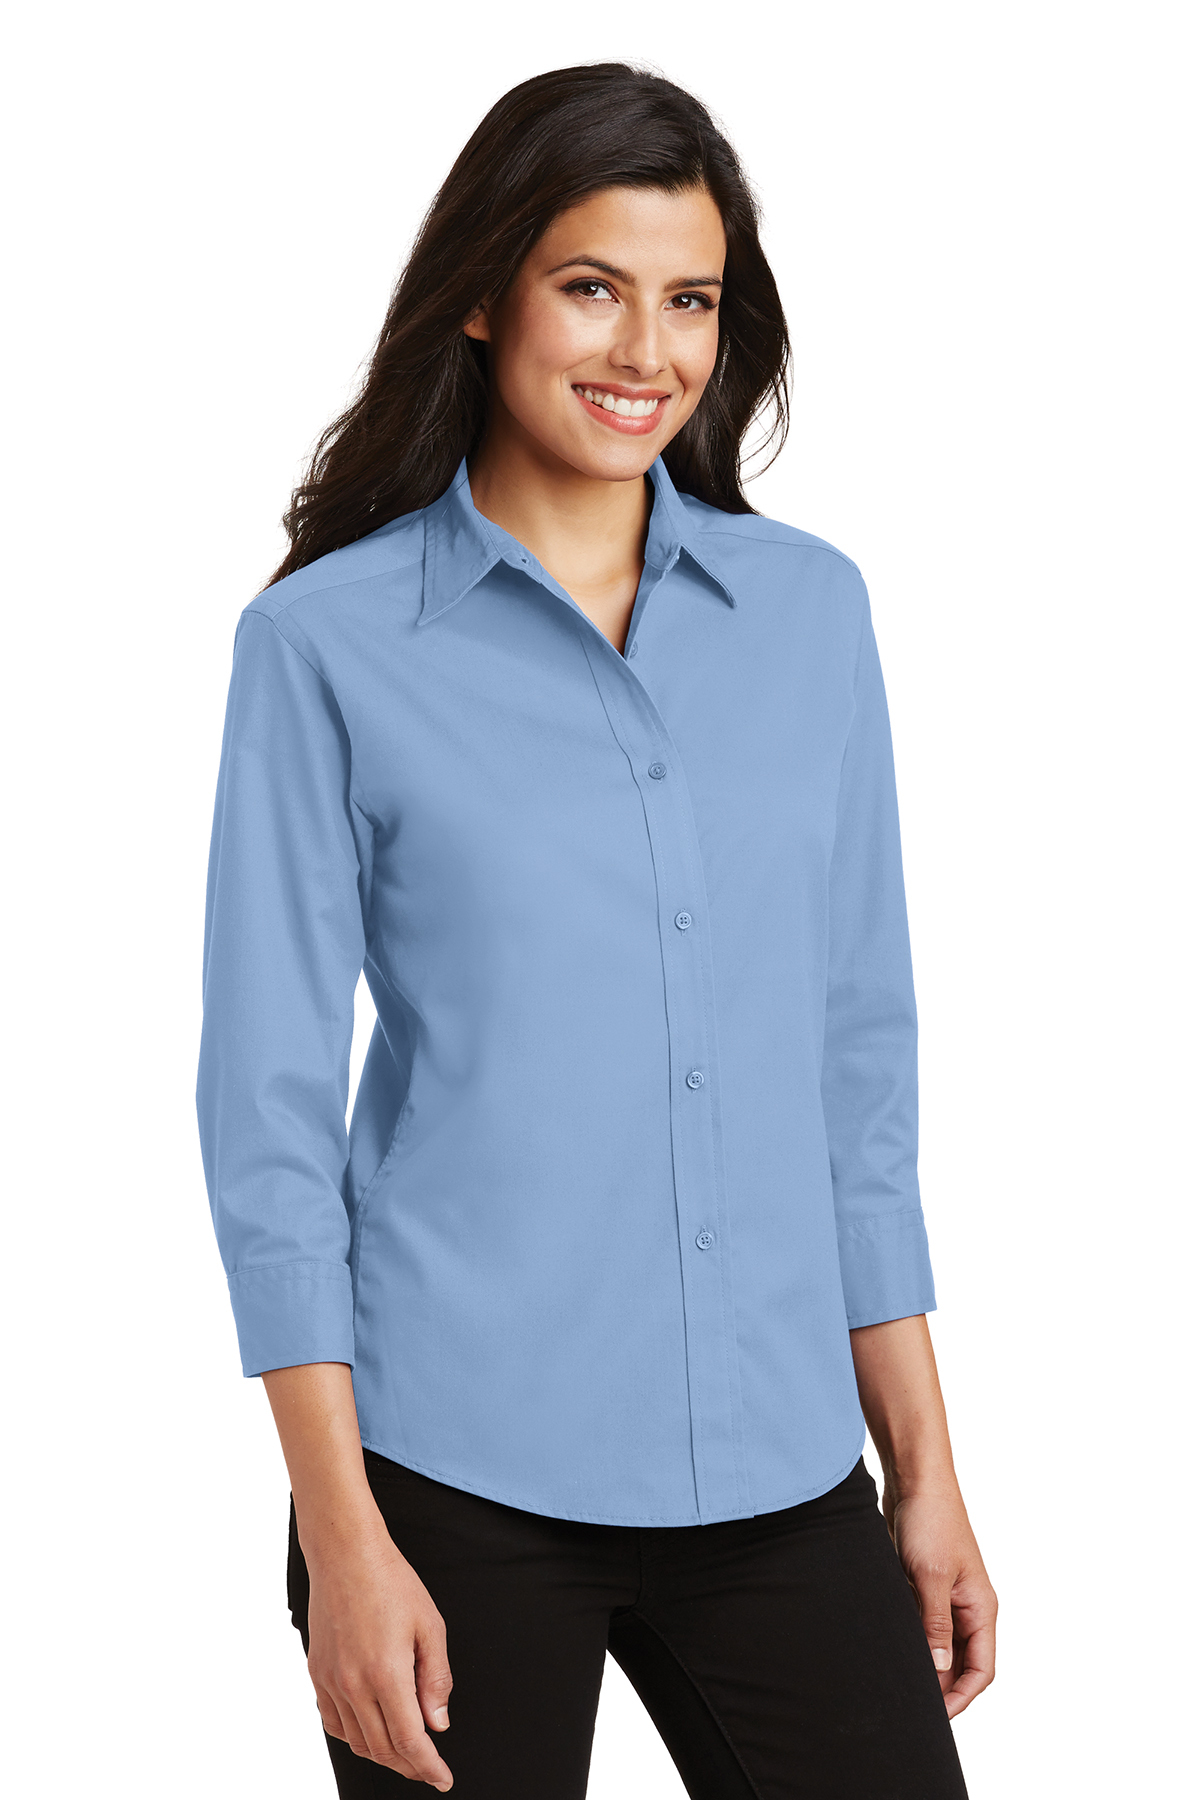 Port Authority Ladies 3/4-Sleeve Easy Care Shirt | Product | Company ...